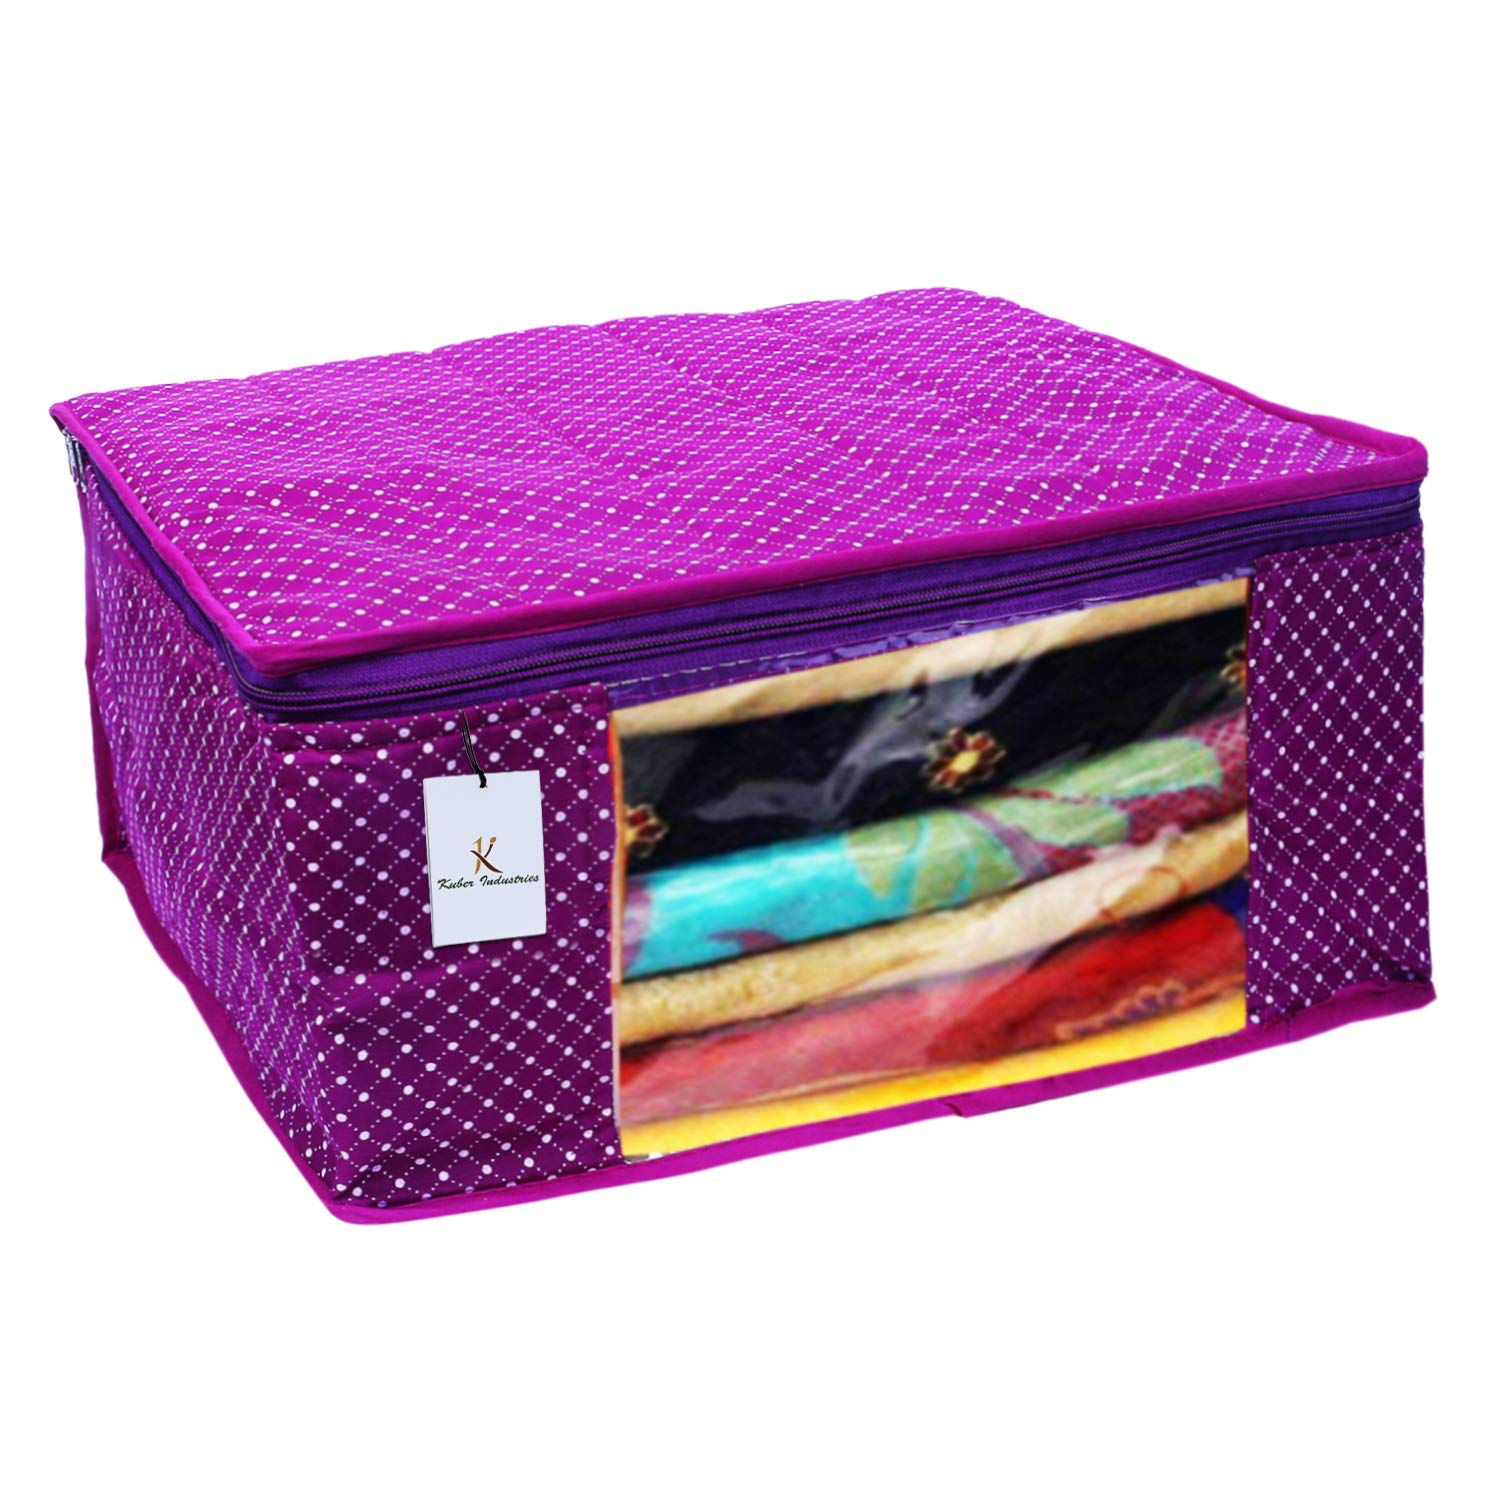 Kuber Industries Polka Dots 2 Piece Cotton 3 Layered Quilted Saree Cover, Purple-CTKTC025806